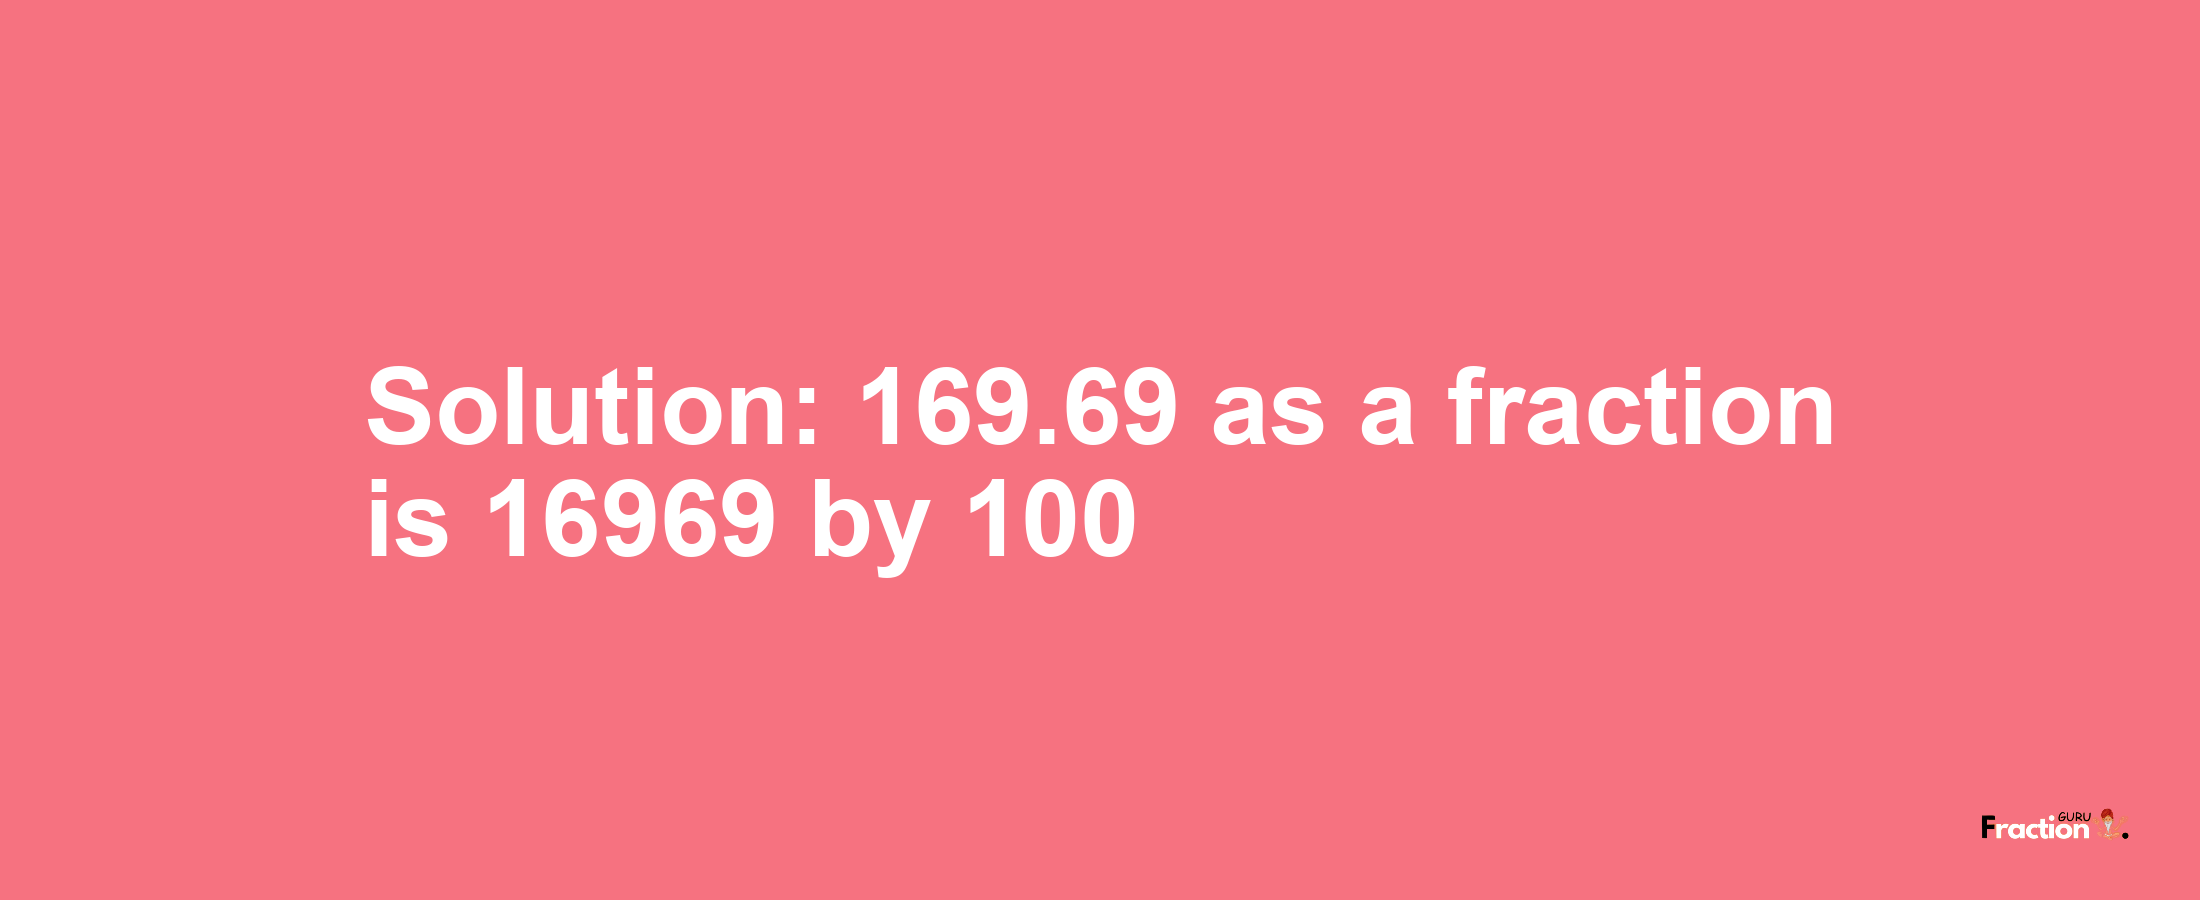 Solution:169.69 as a fraction is 16969/100